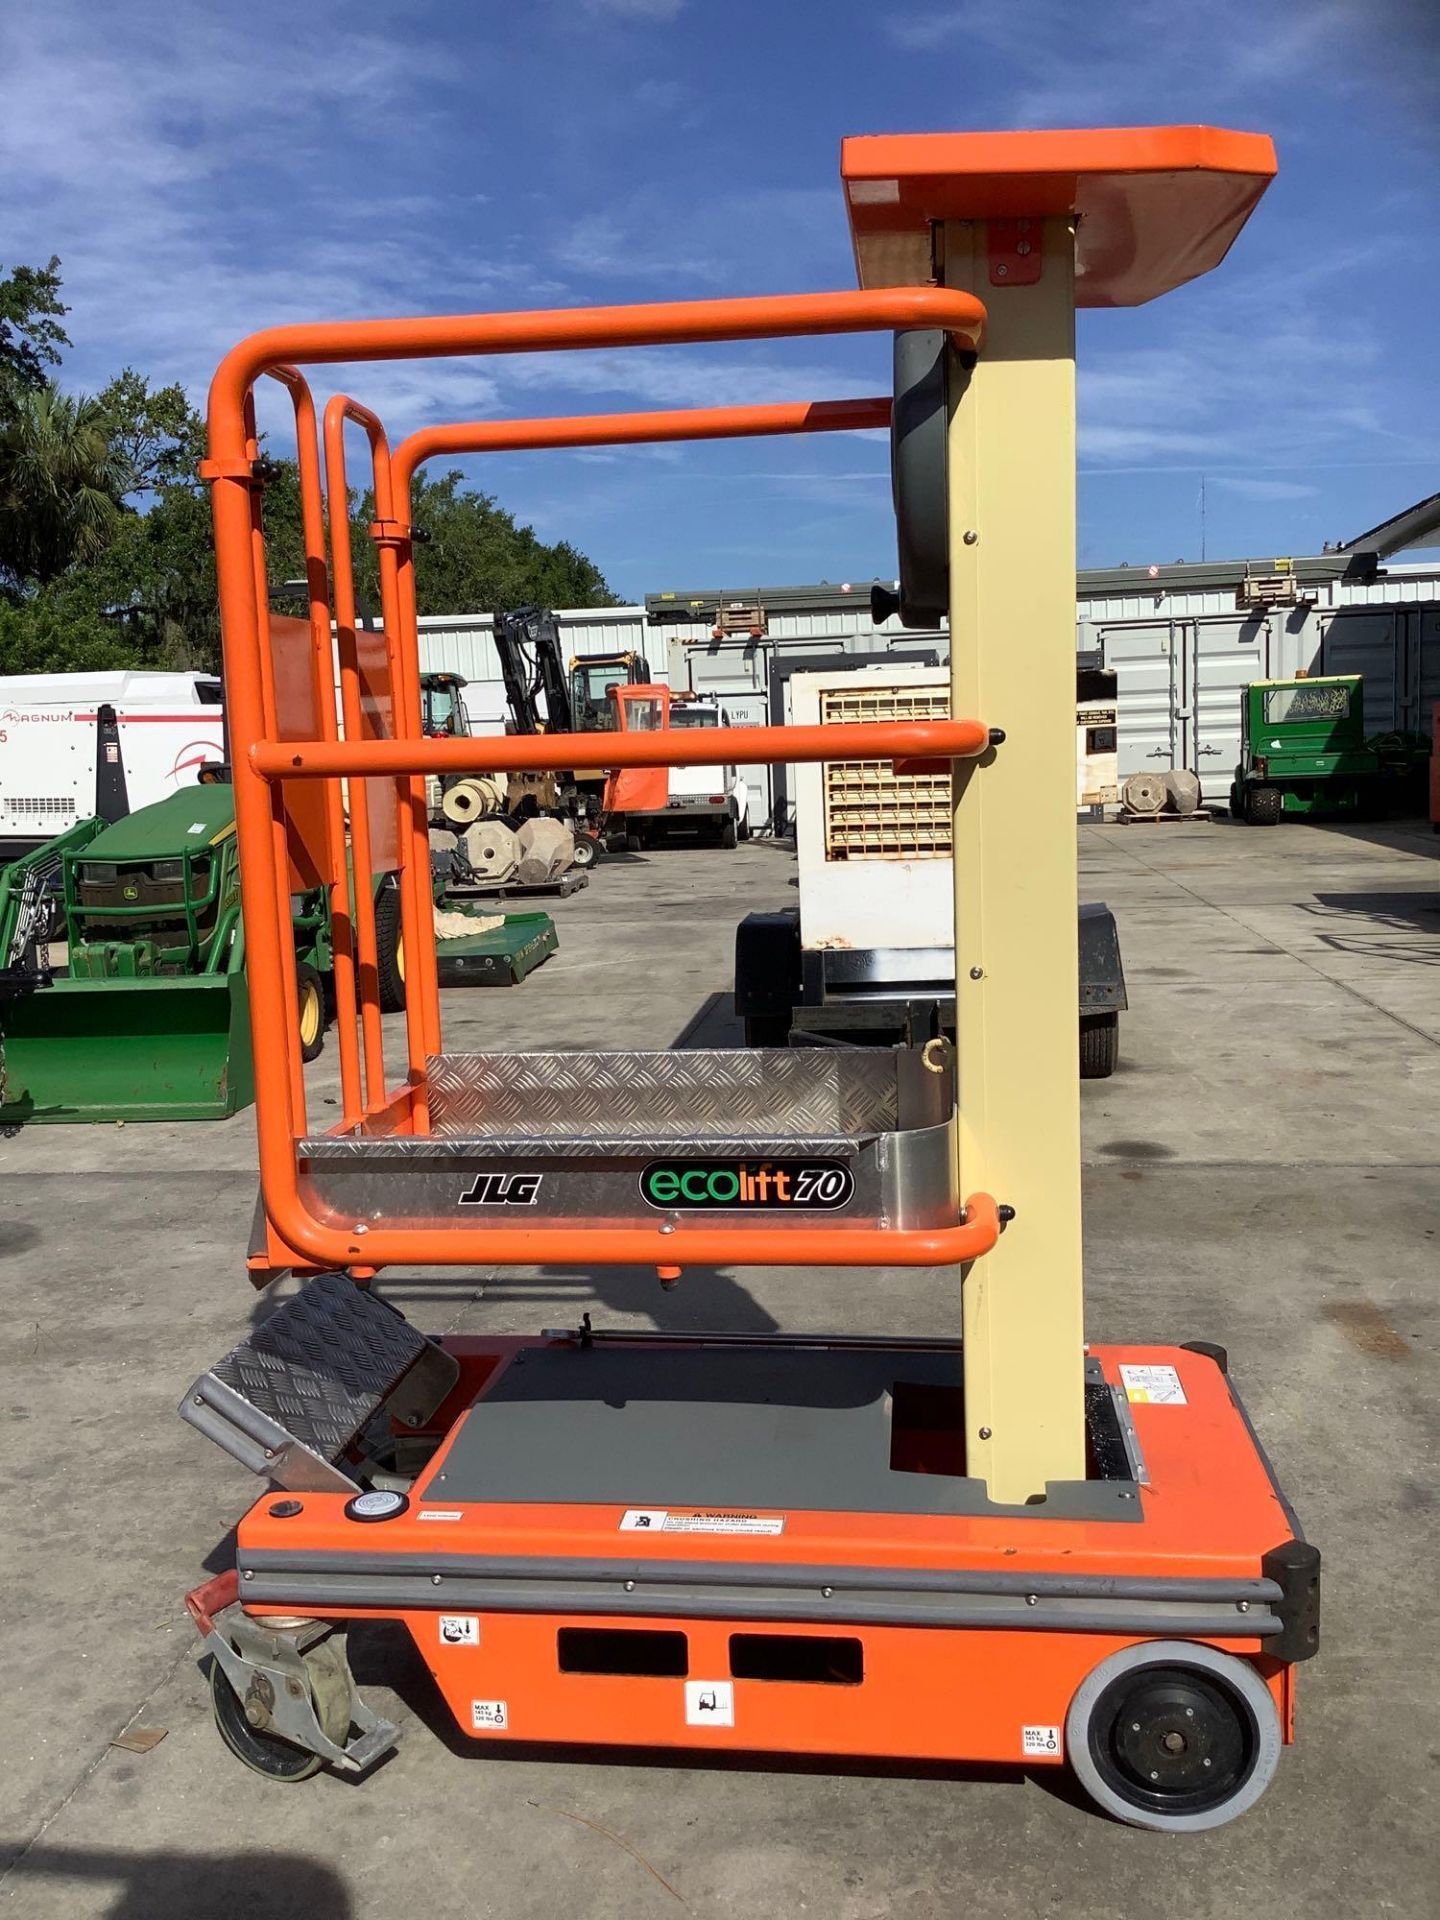 2018 JLG ECOLIFT 70,MANUAL, APPROX MAX PLATFORM HEIGHT 7FT, NON MARKING TIRES